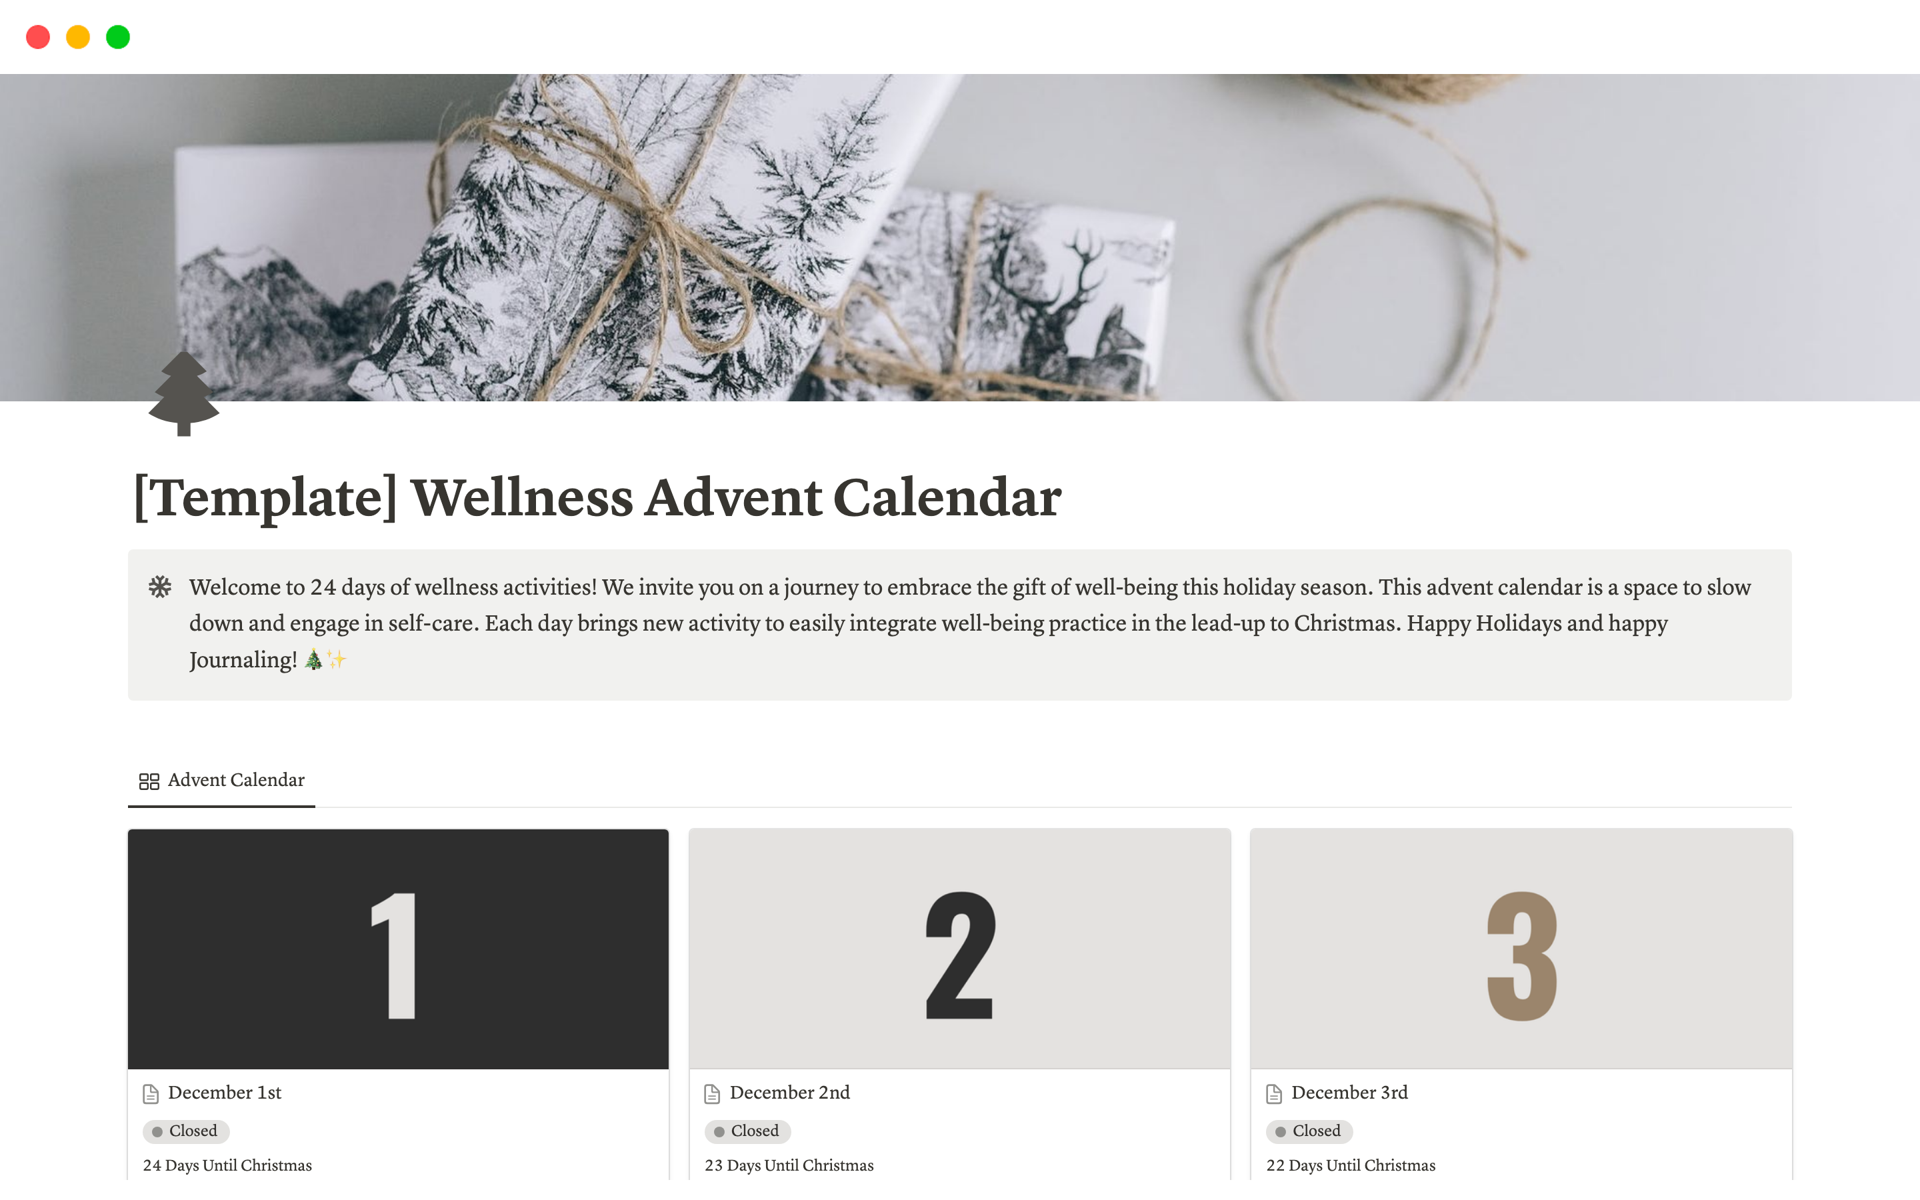 Welcome to our 24 Days of Wellbeing Advent Calendar! 